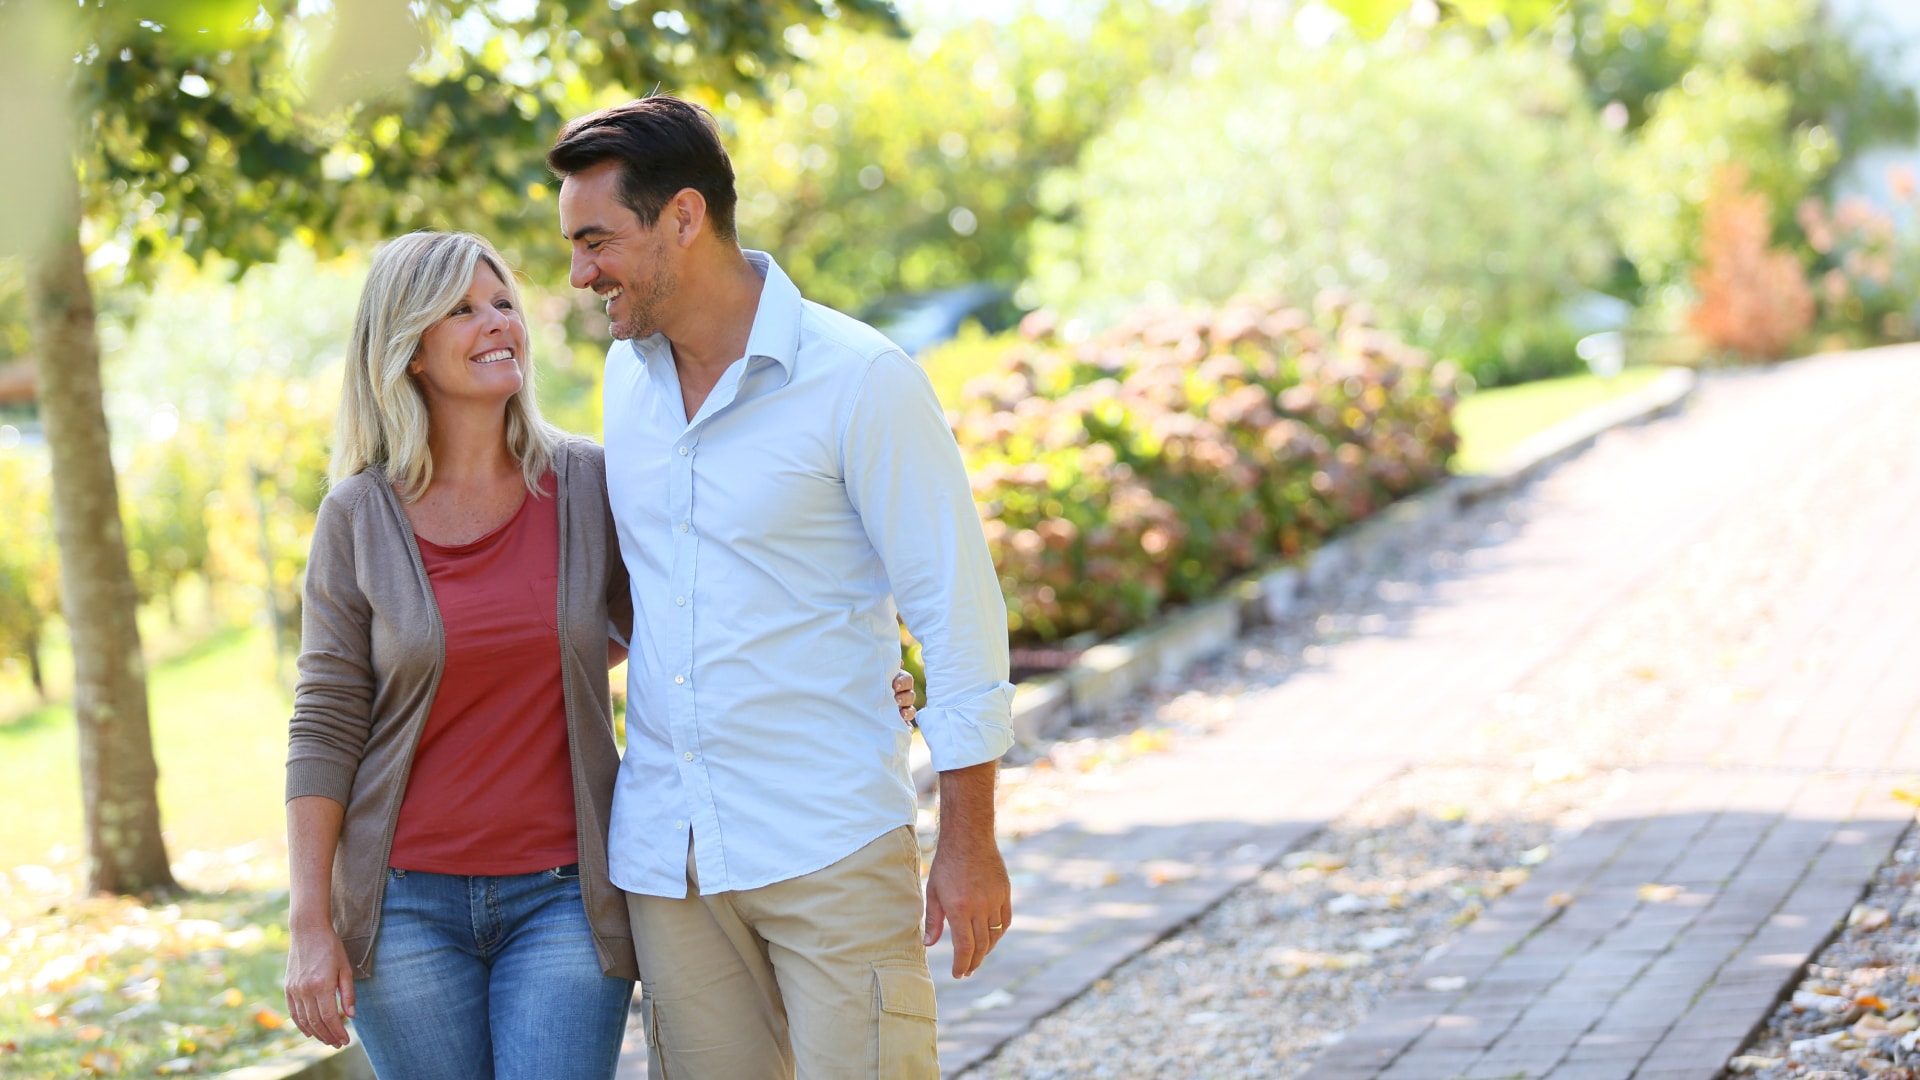 Couple on a walk in sun on brick pathway surrounded by plants and trees